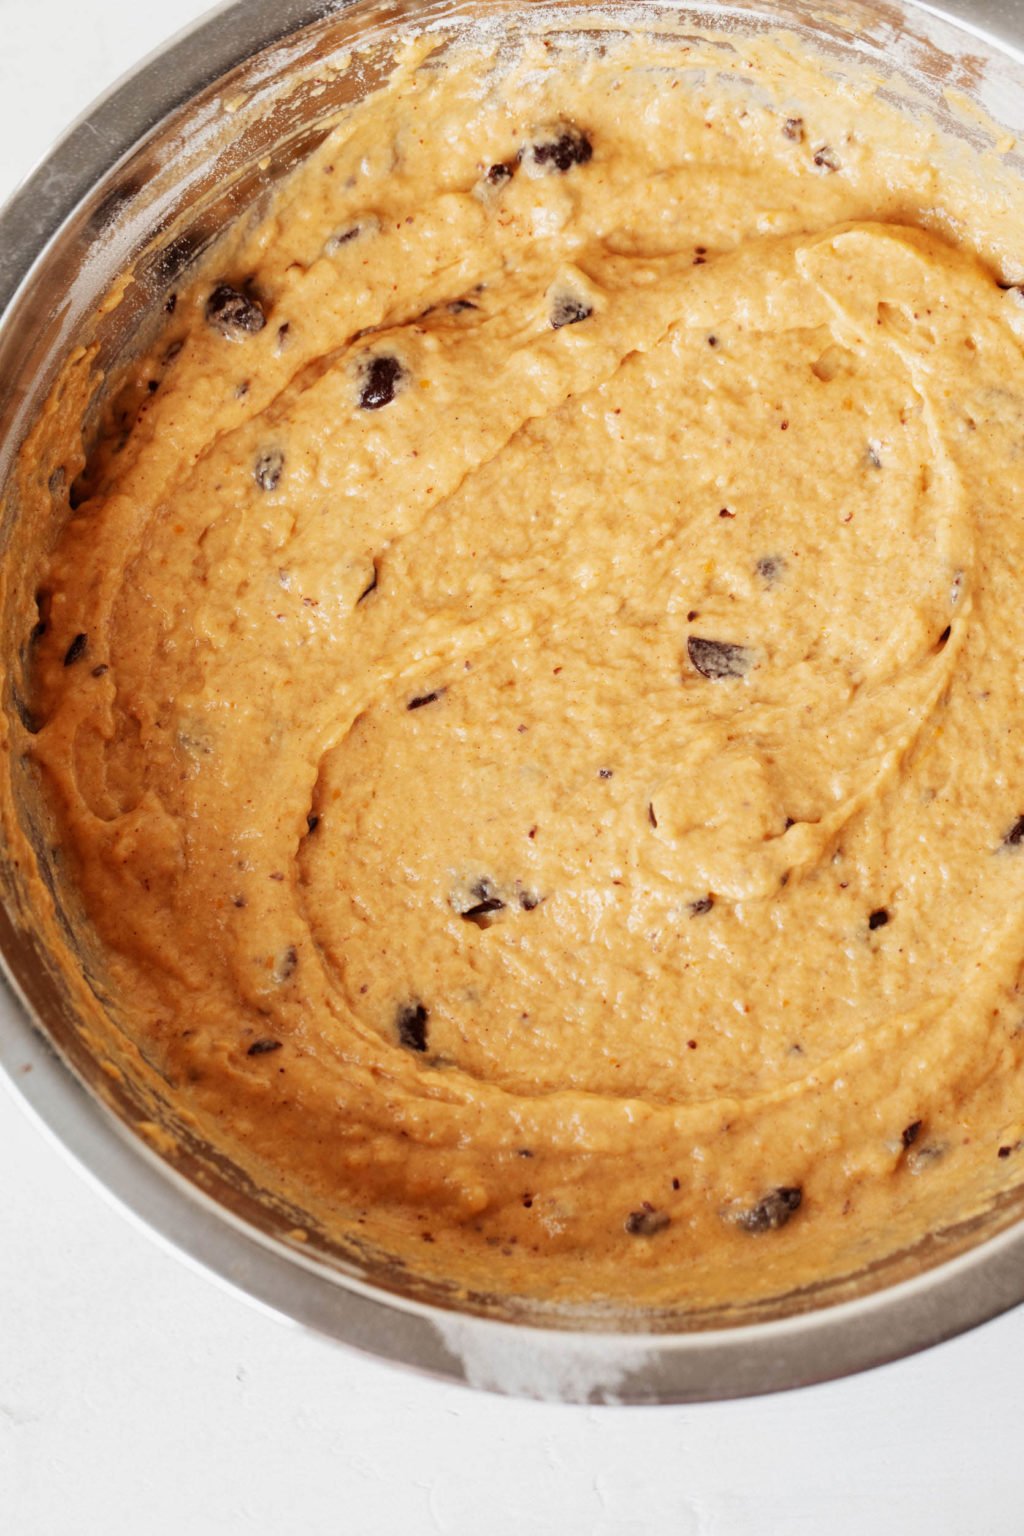 A mixing bowl is full of a pumpkin spiced batter for baking.